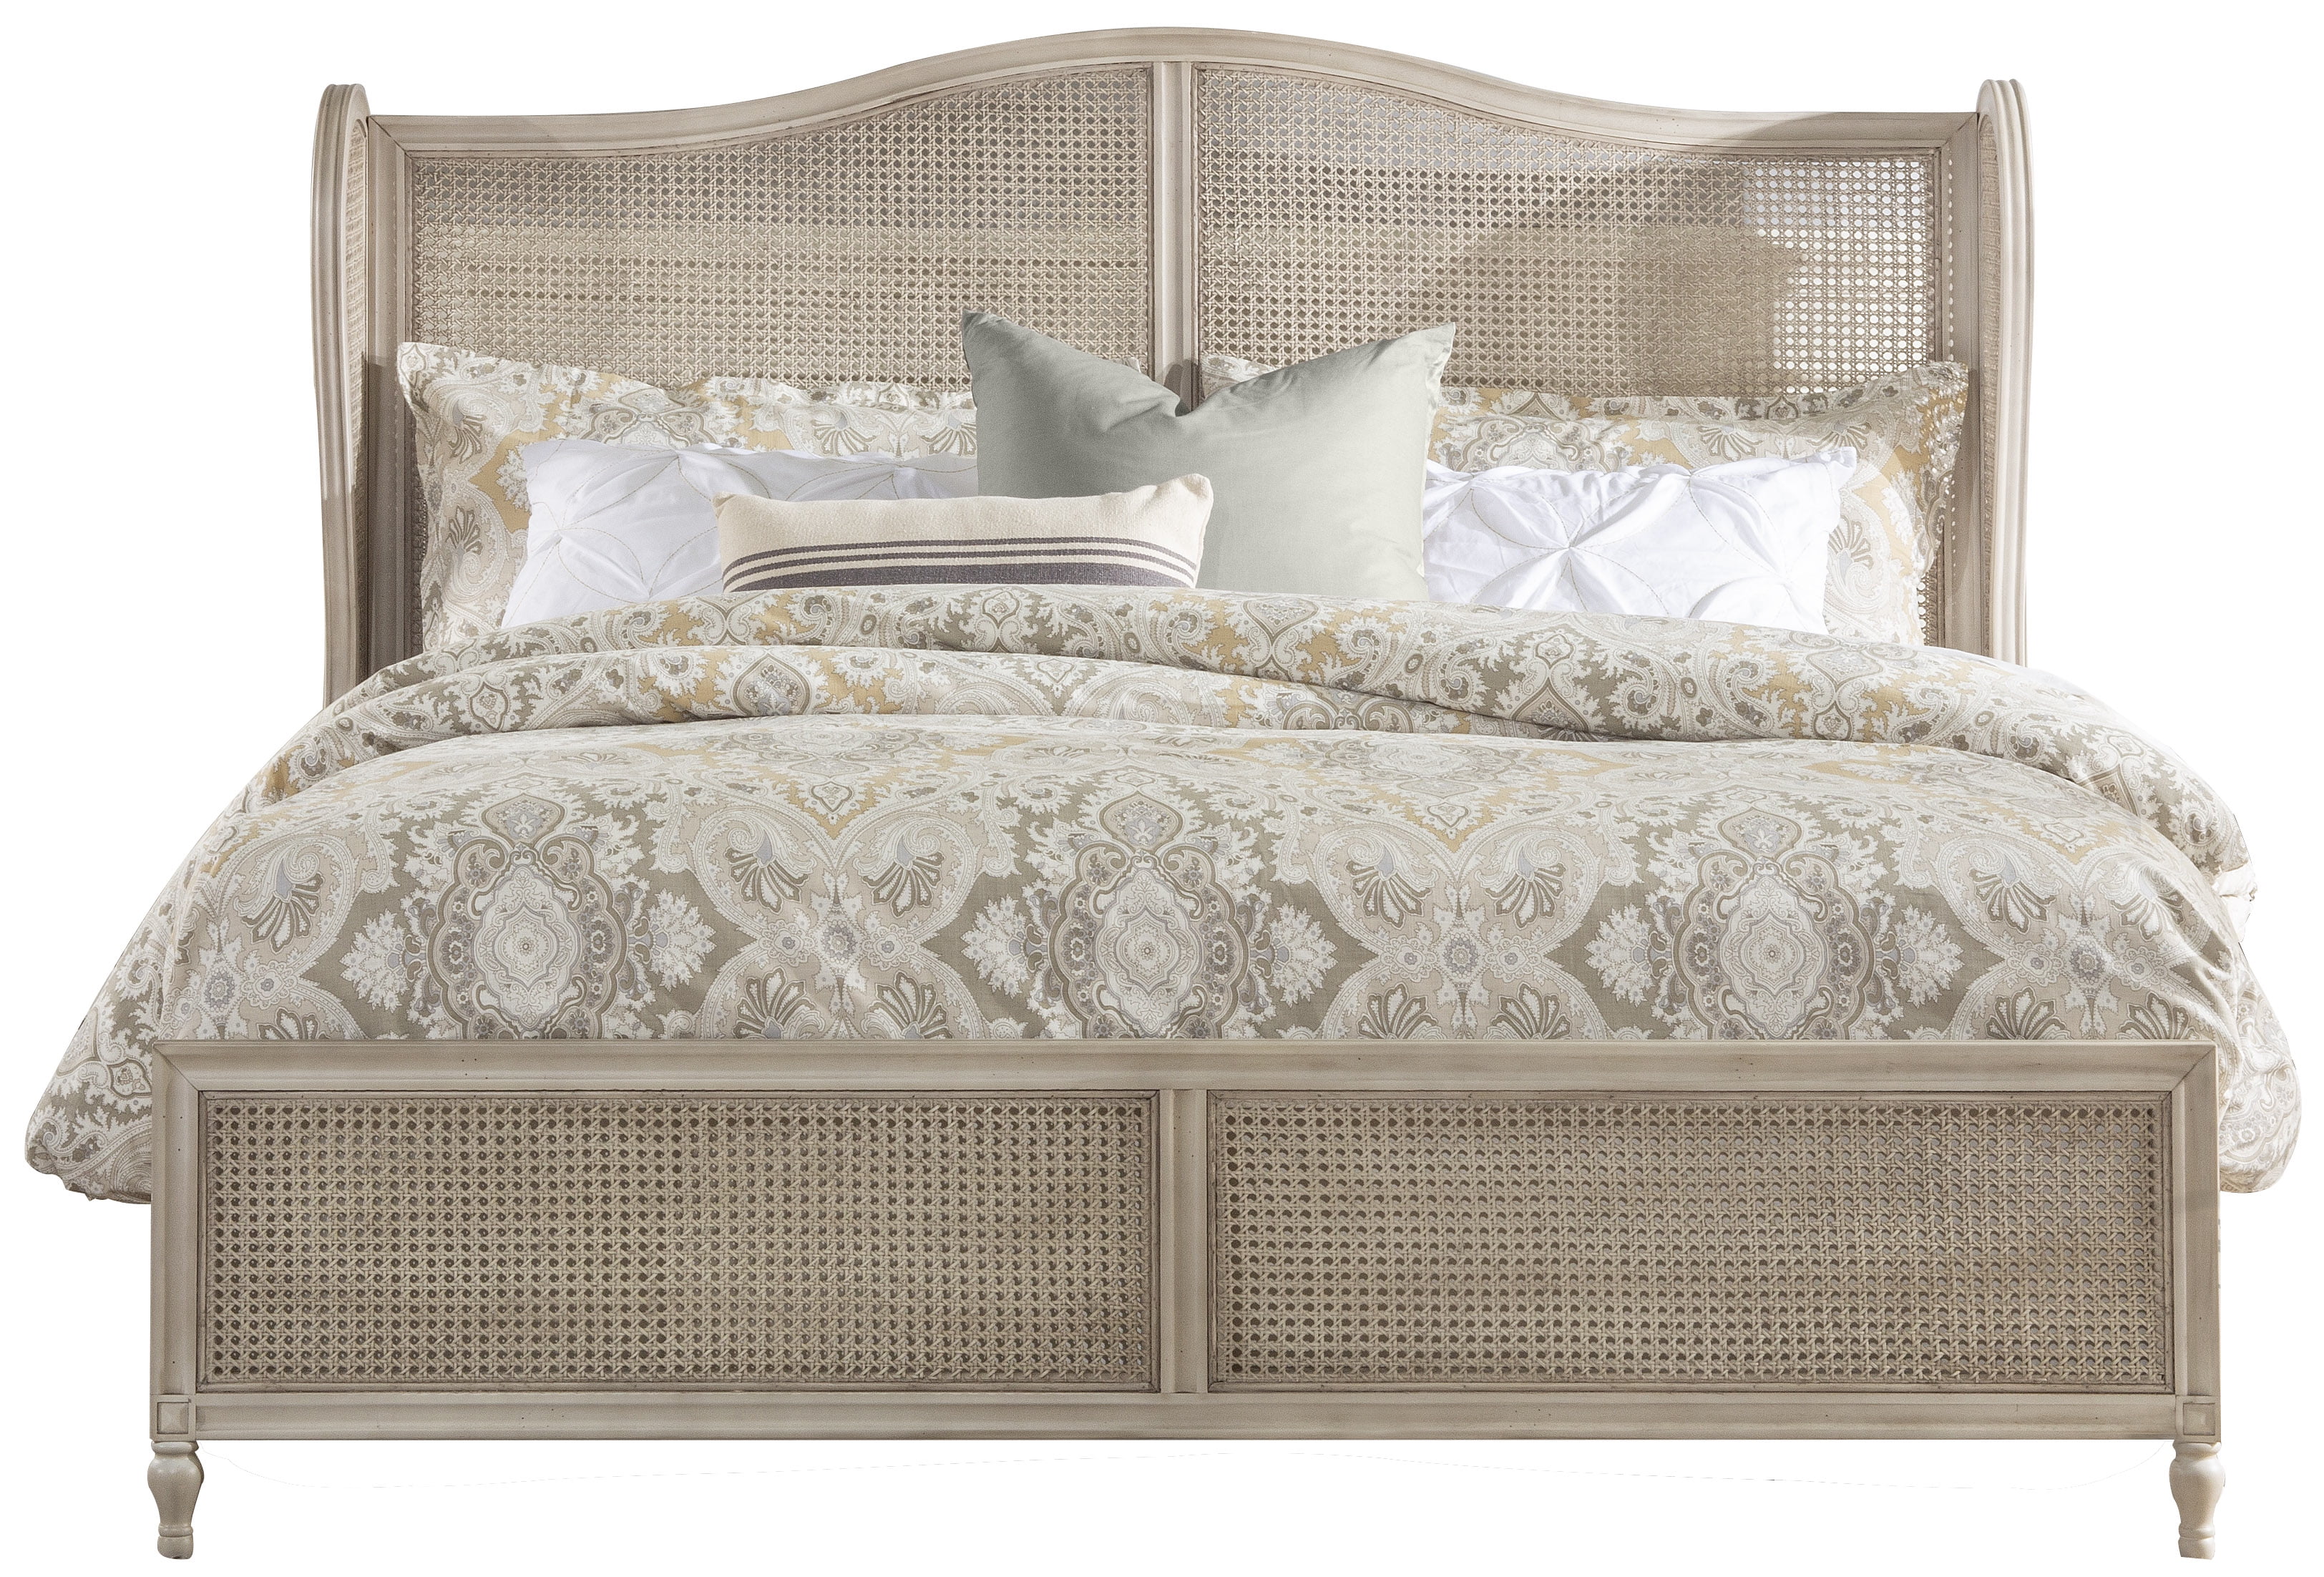 Hilale Furniture Sausalito King Cane, Antique White King Bed